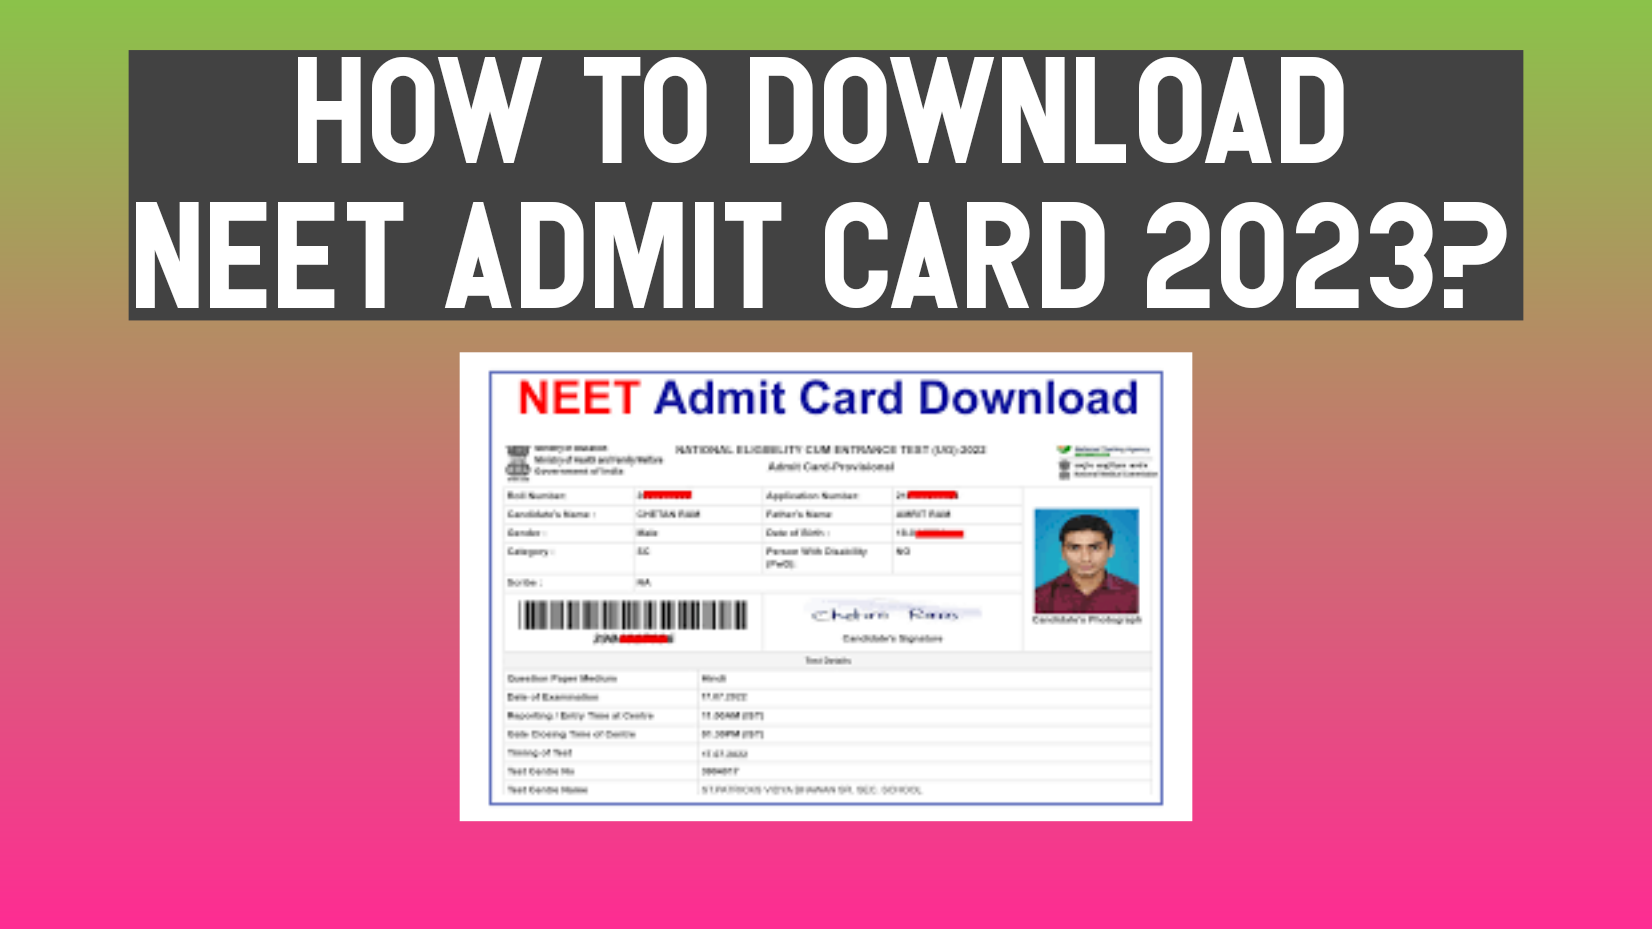 Shemale At Nude Beach - How to Download Neet Admit Card 2023 - EDUCATIONAL STUFF